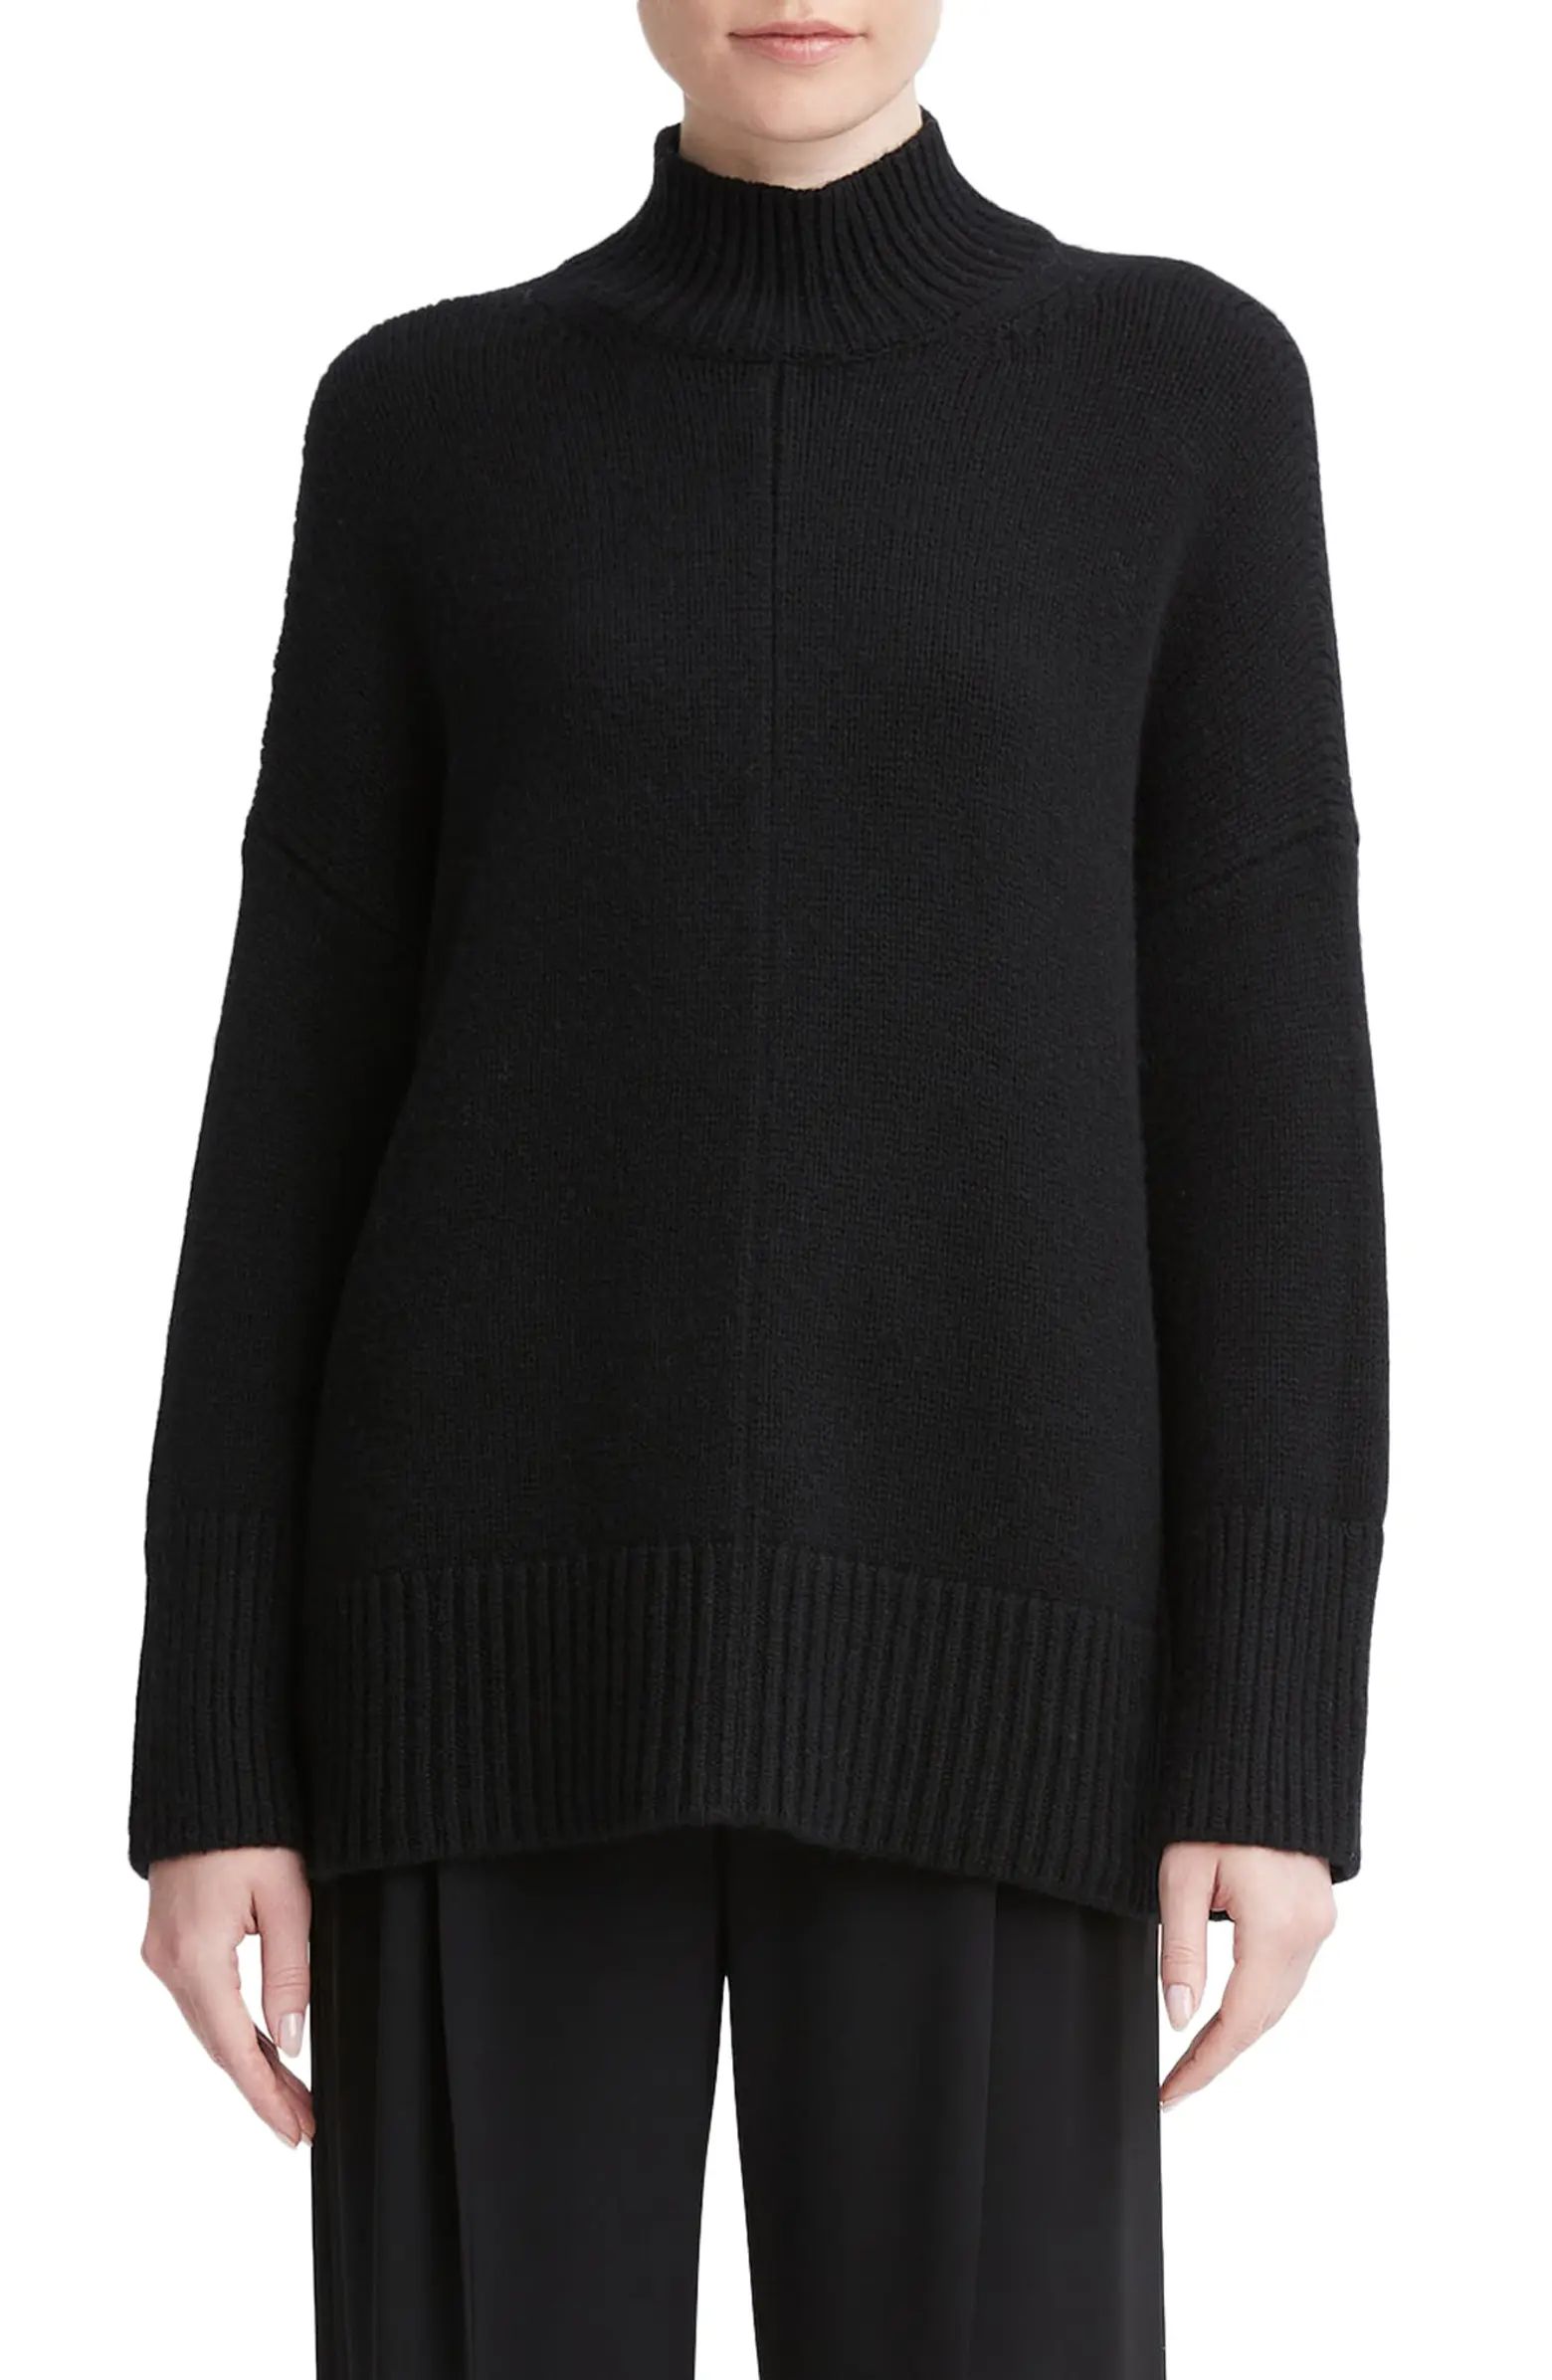 Oversize Wool & Cashmere Turtleneck Tunic Sweater | Nordstrom